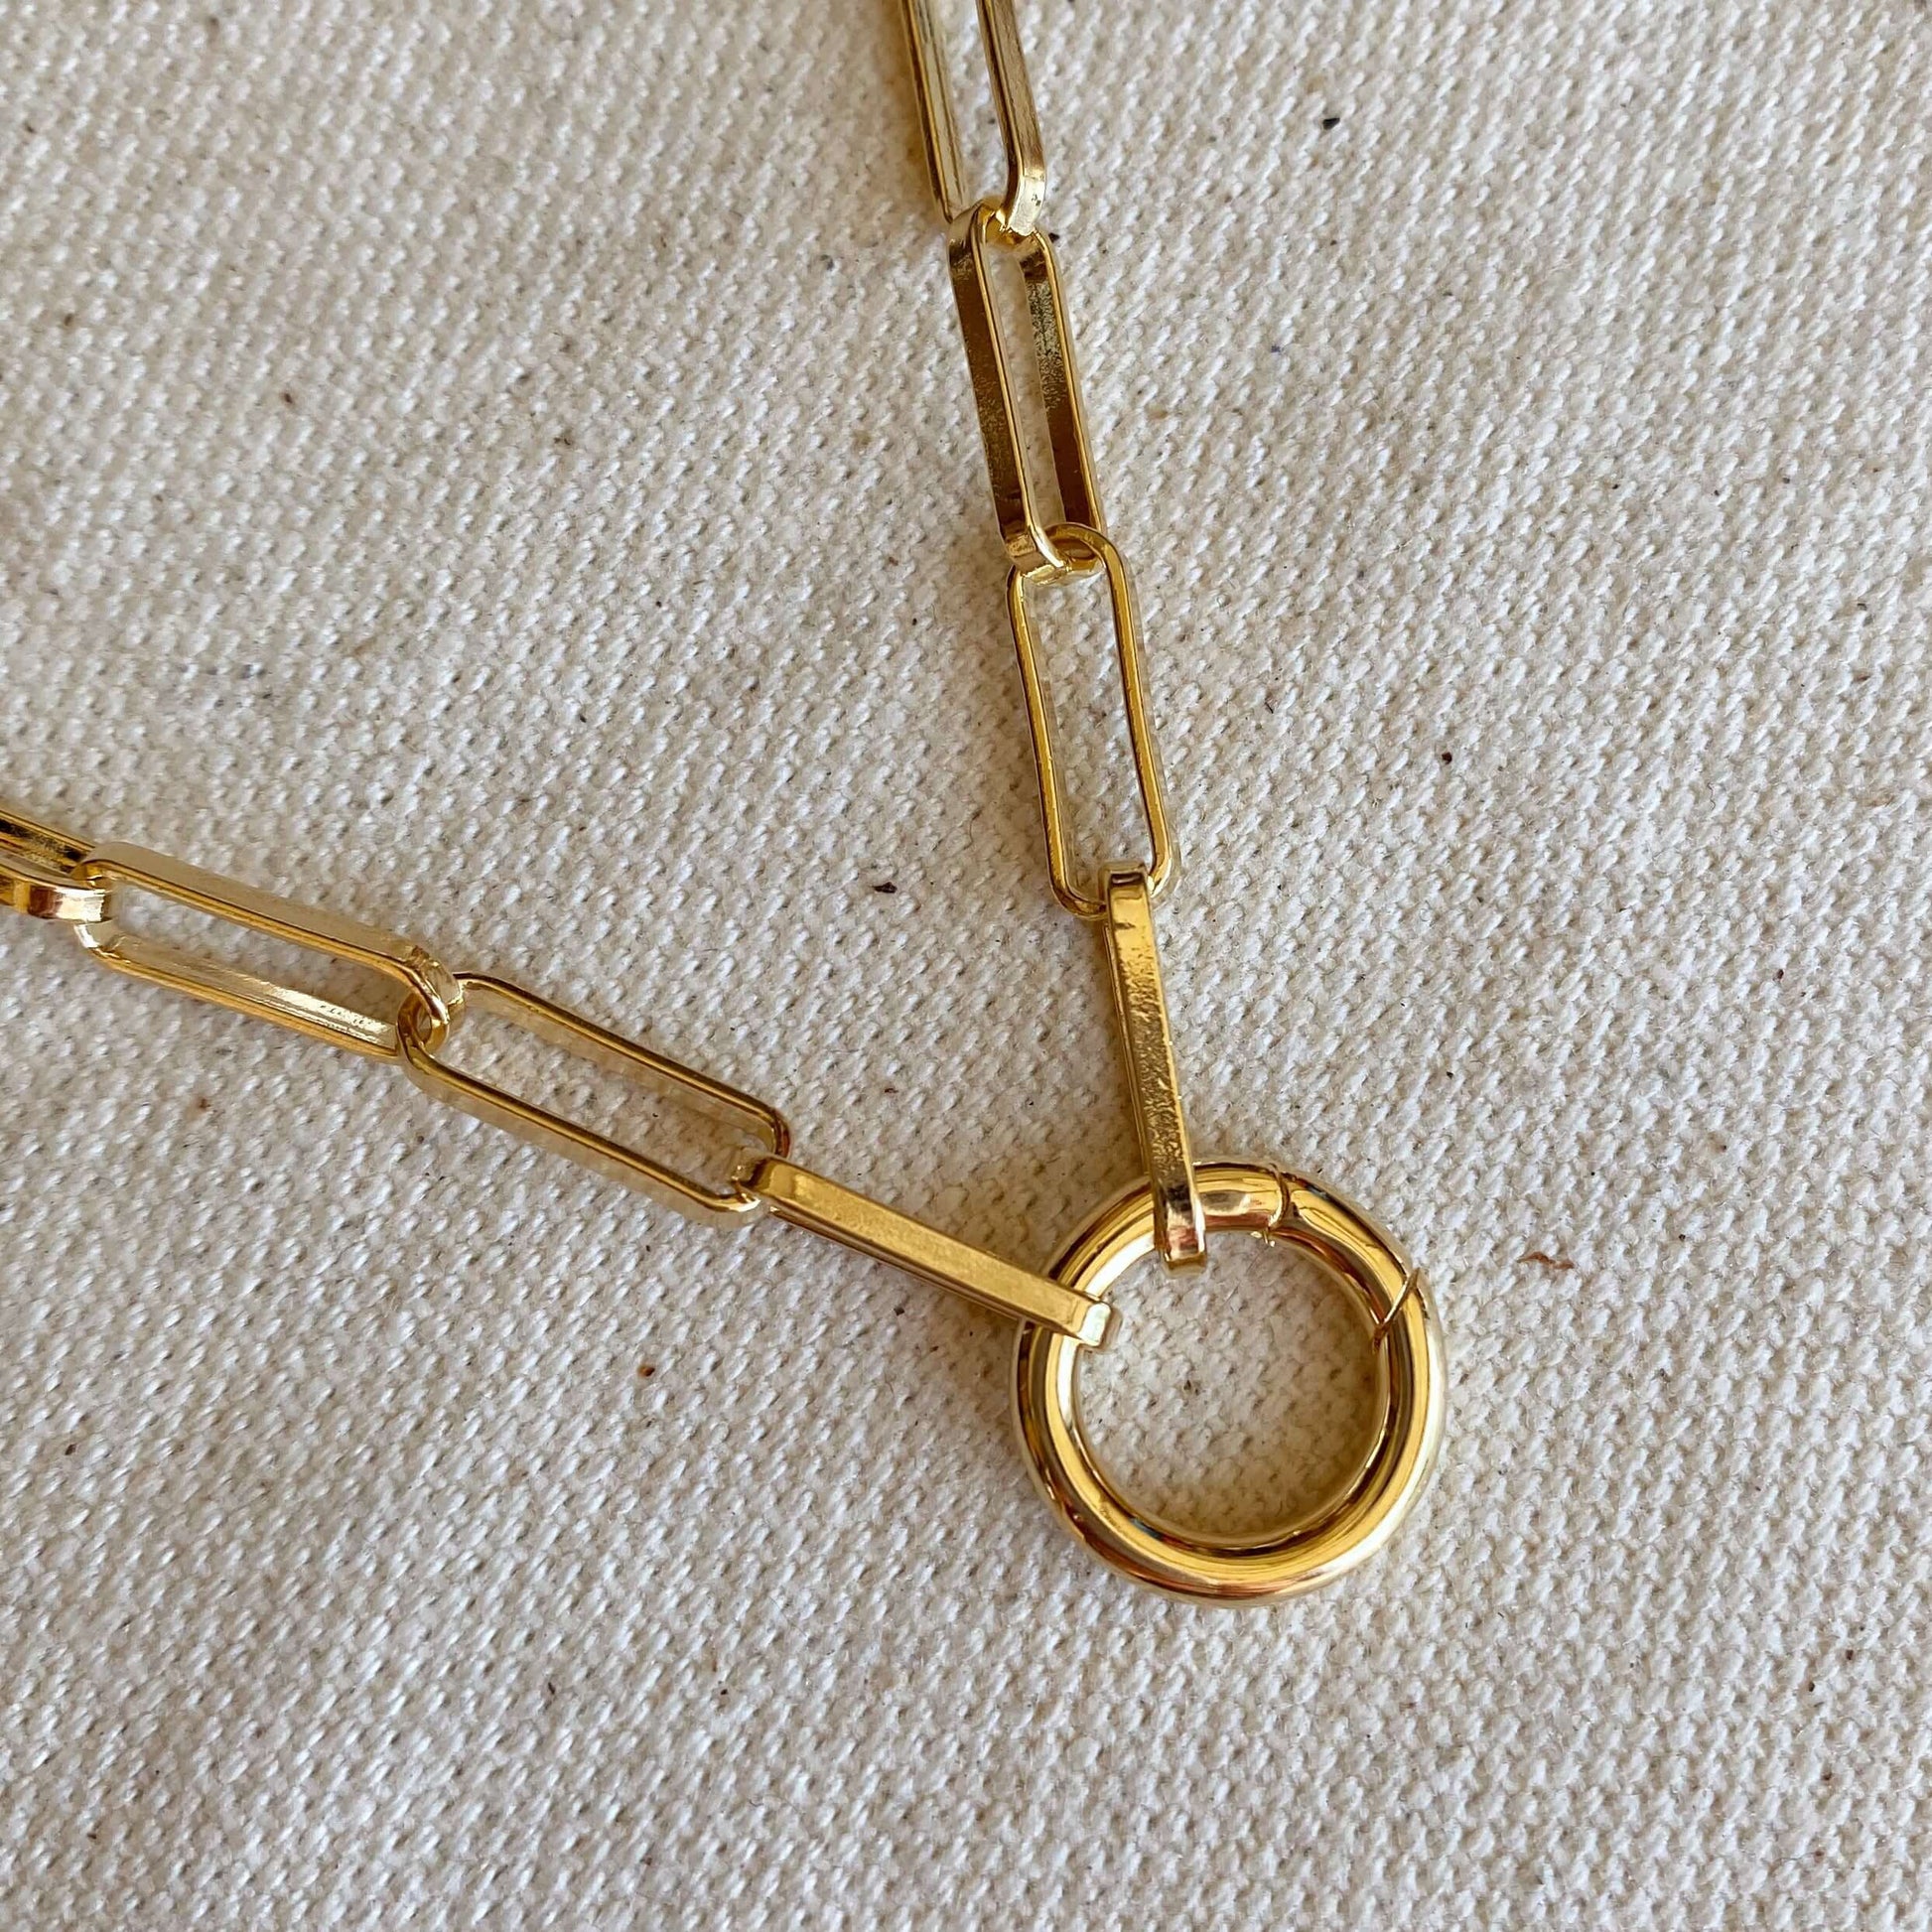 GoldFi 18k Gold Filled Paperclip Chain Necklace Featuring Carabine Clasp